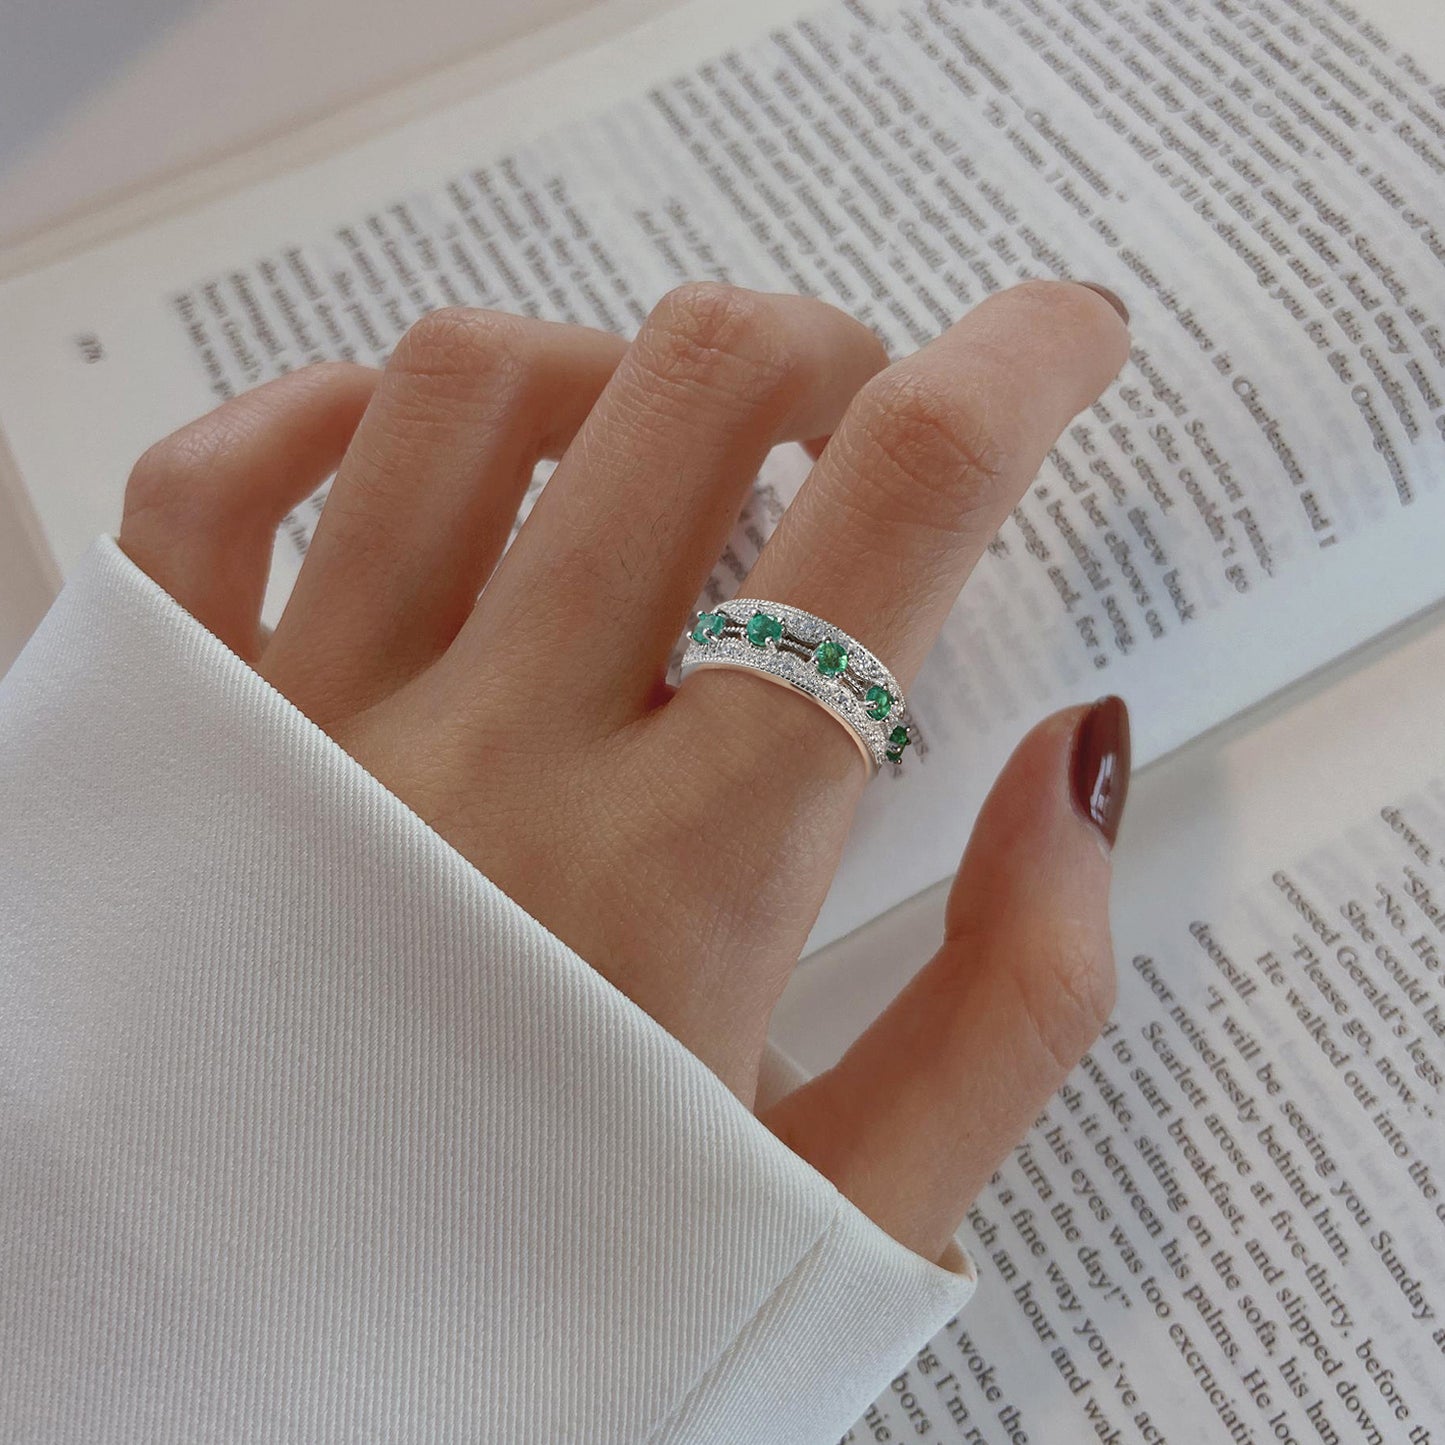 Light And Extravagant Style, Small Design Sense, Emerald Row Ring